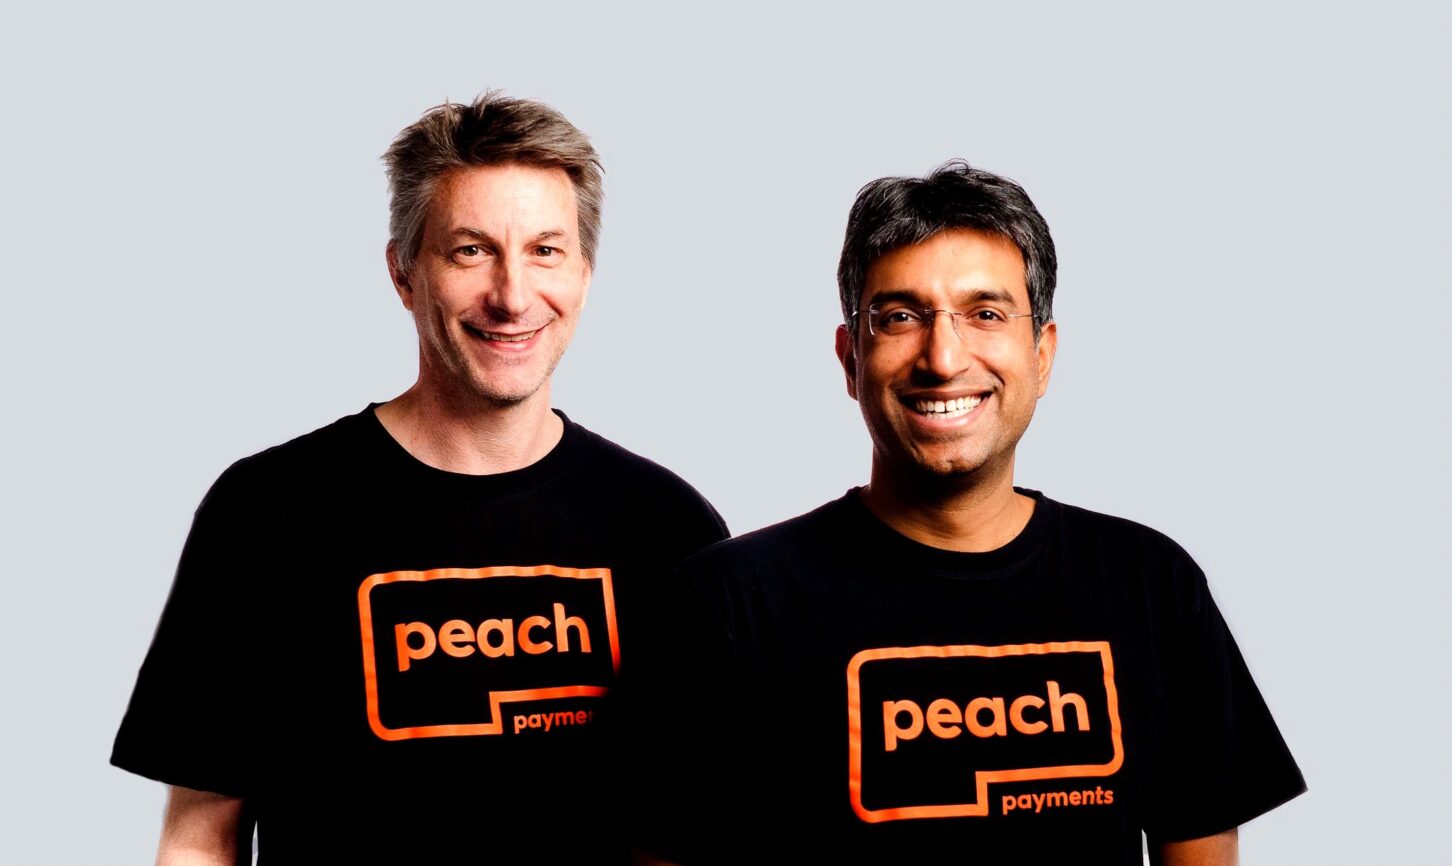 Peach-Payments-Co-Founders-1452x866.jpg?x59815